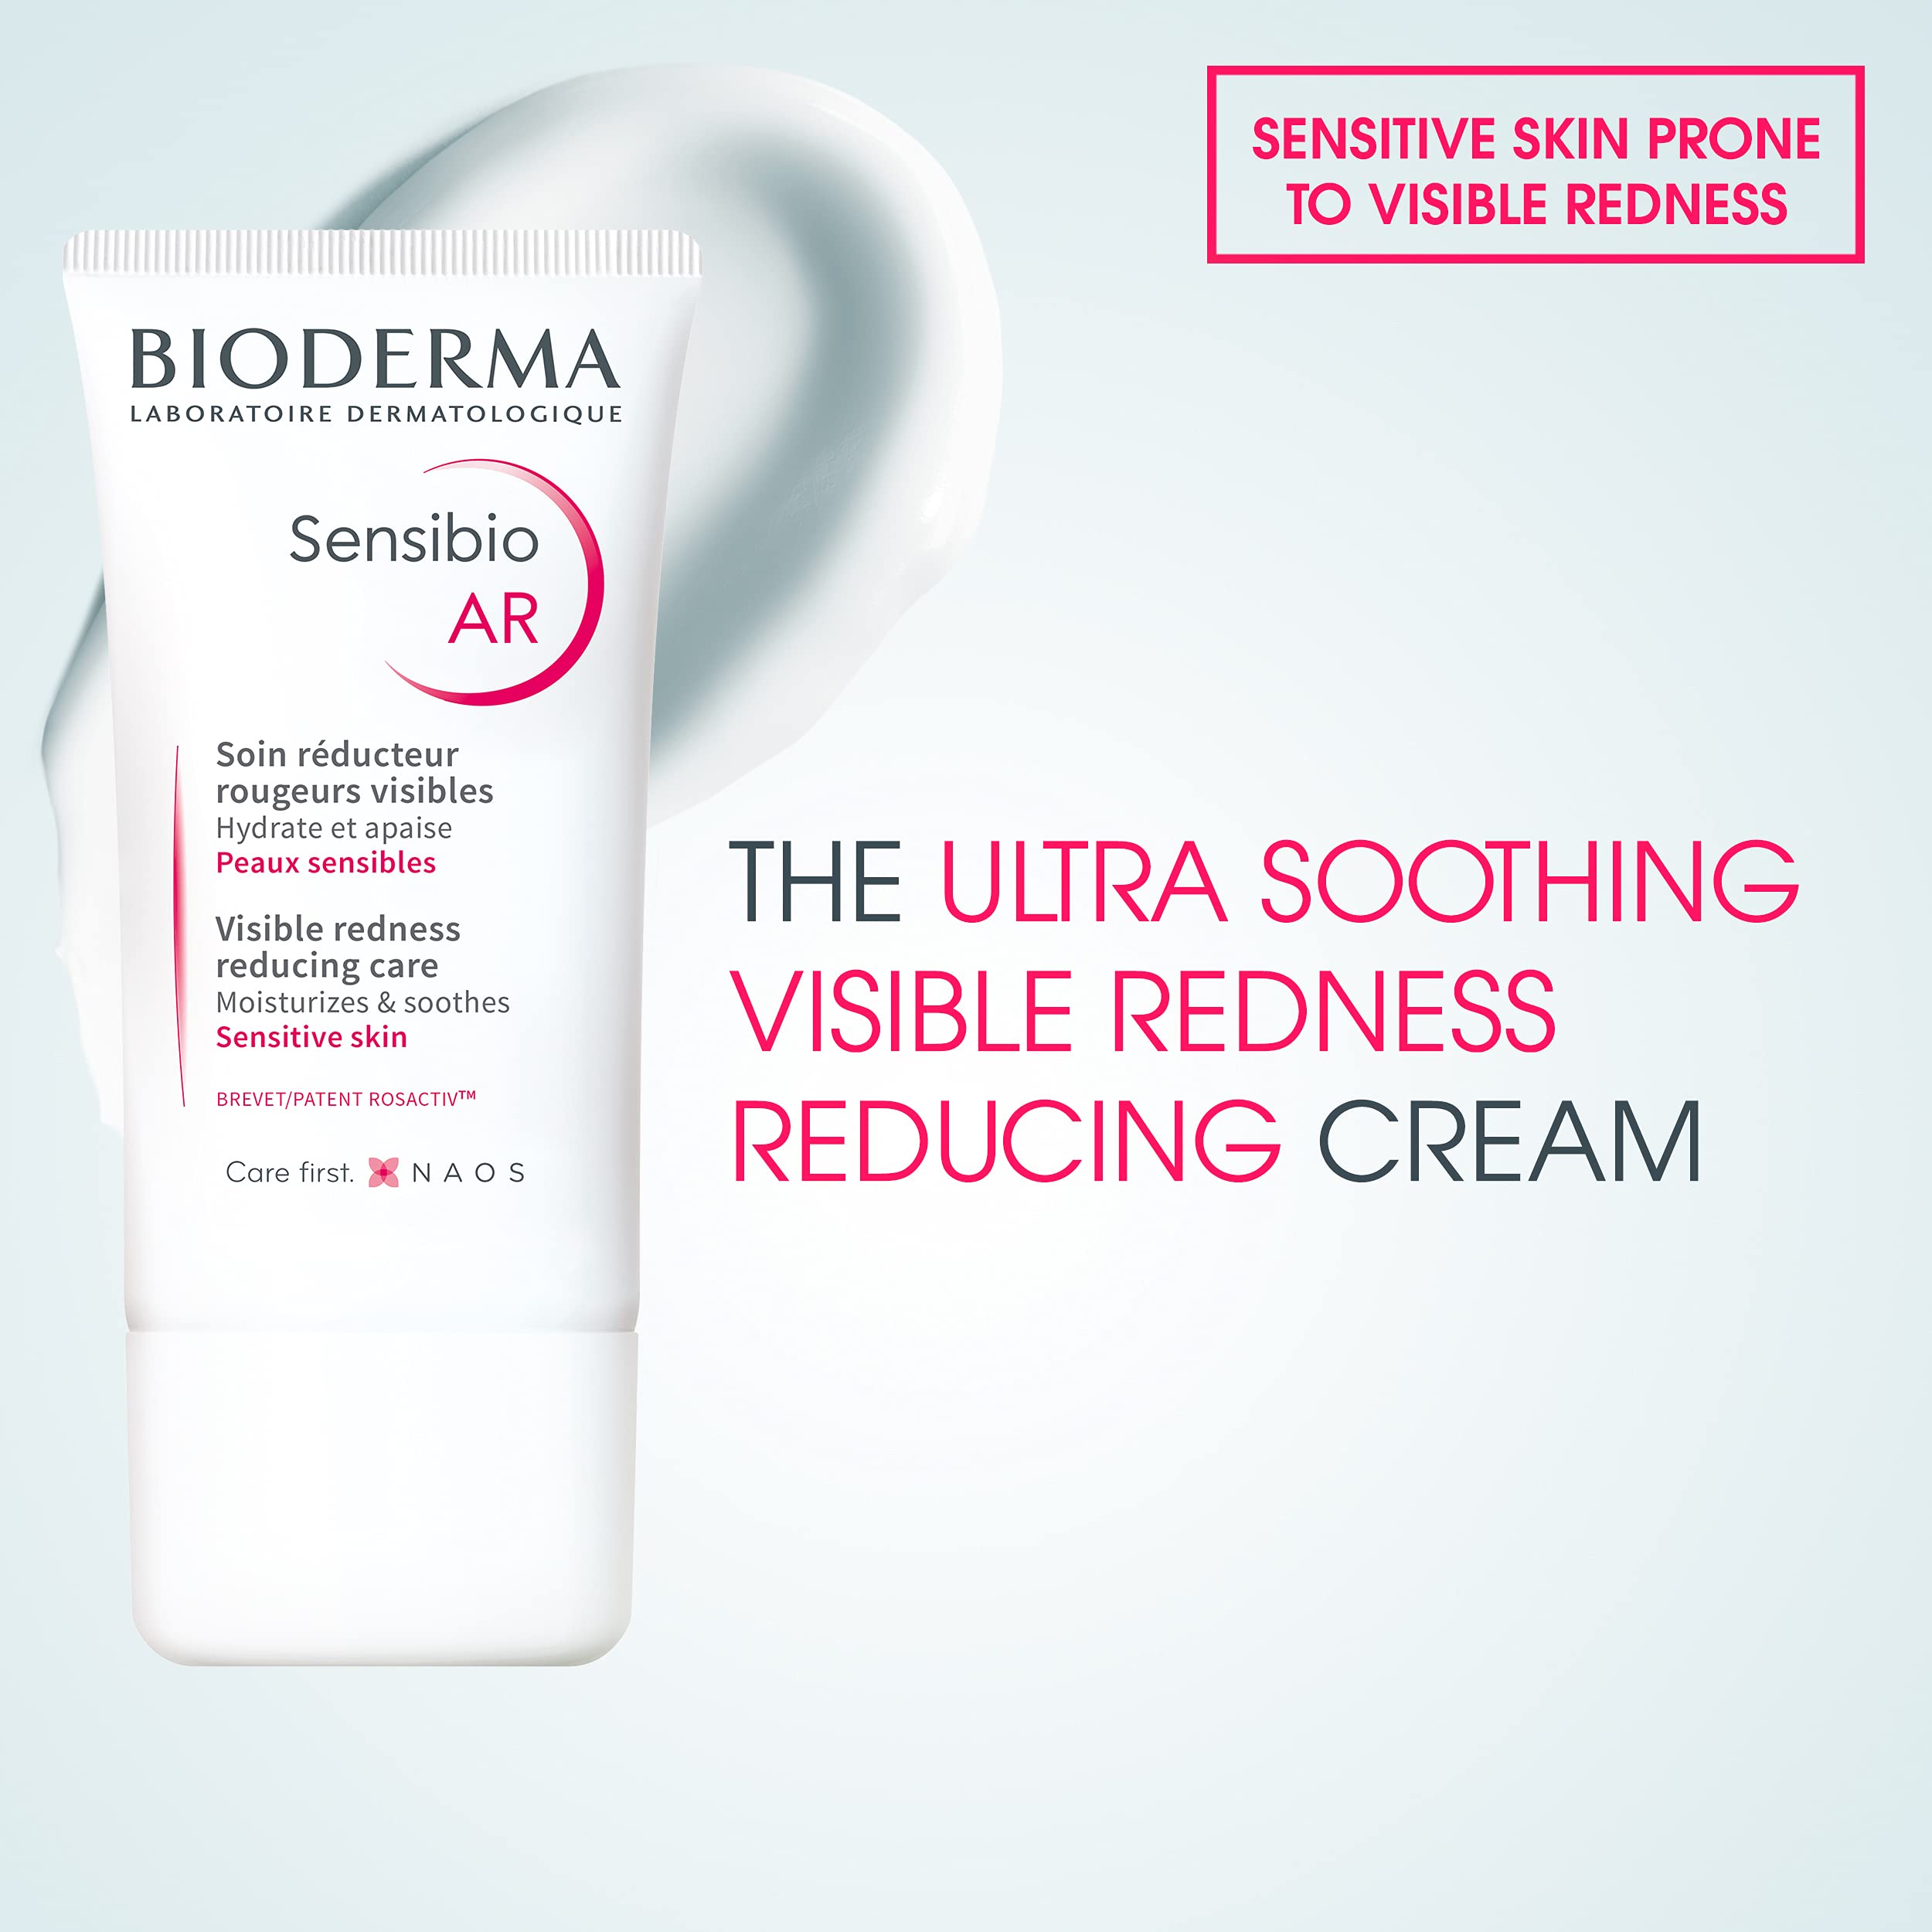 Bioderma - Visible Redness Relief for Face - Sensibio - Visible Redness Reducing Cream - Skin Soothing and Moisturizing - Visible Redness Reducing Skin Care for Sensitive Skin